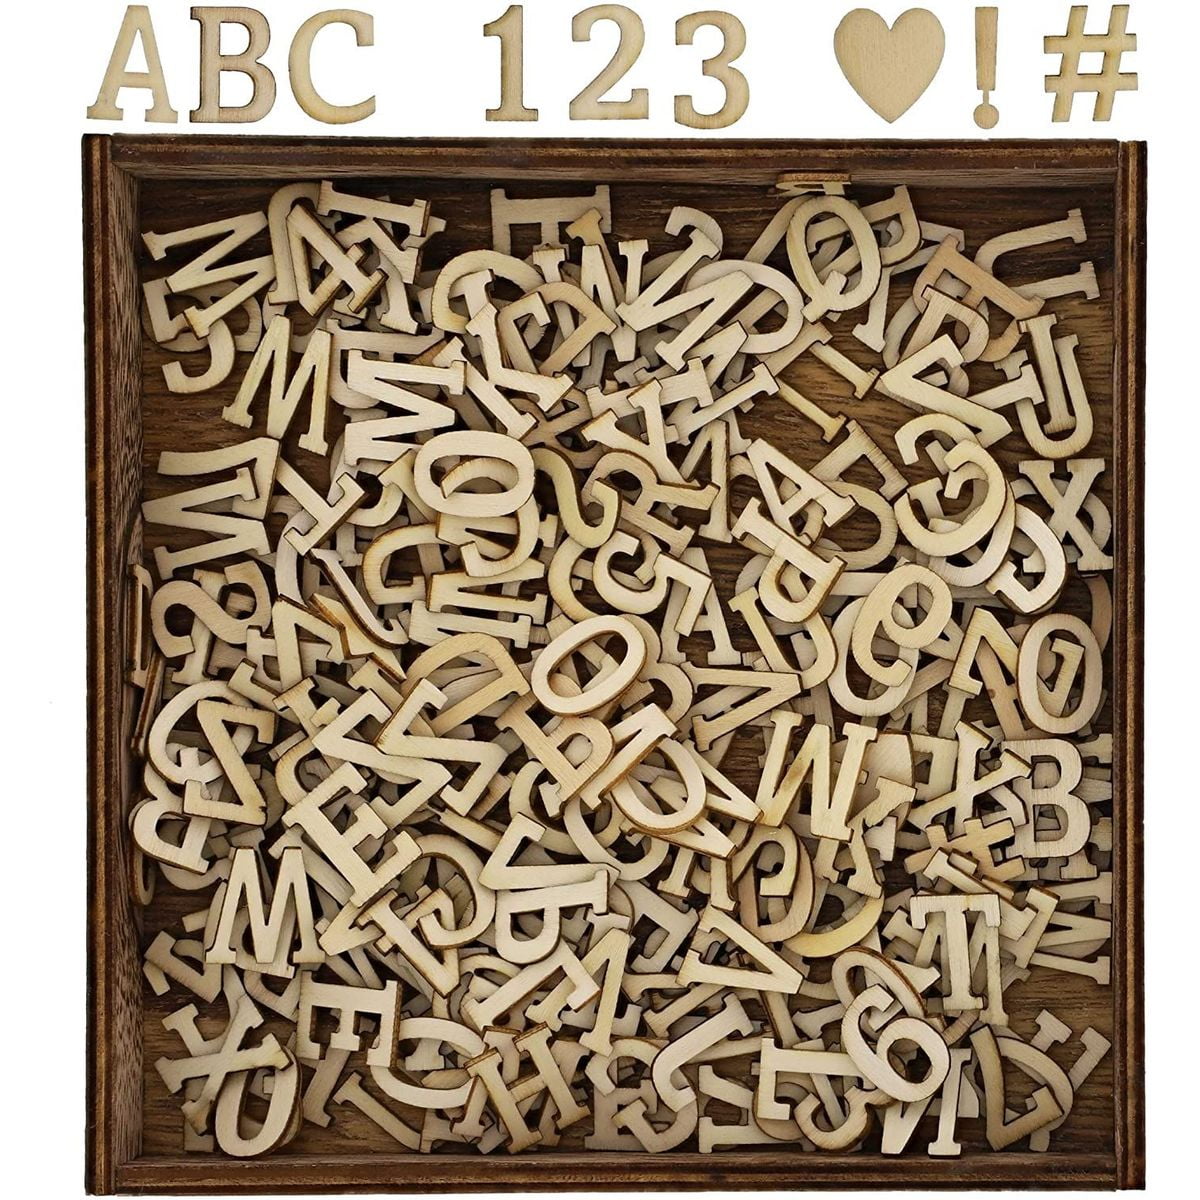 Wooden Letters And Numbers MDF Shapes Decoration Scrapbook Embellishments 